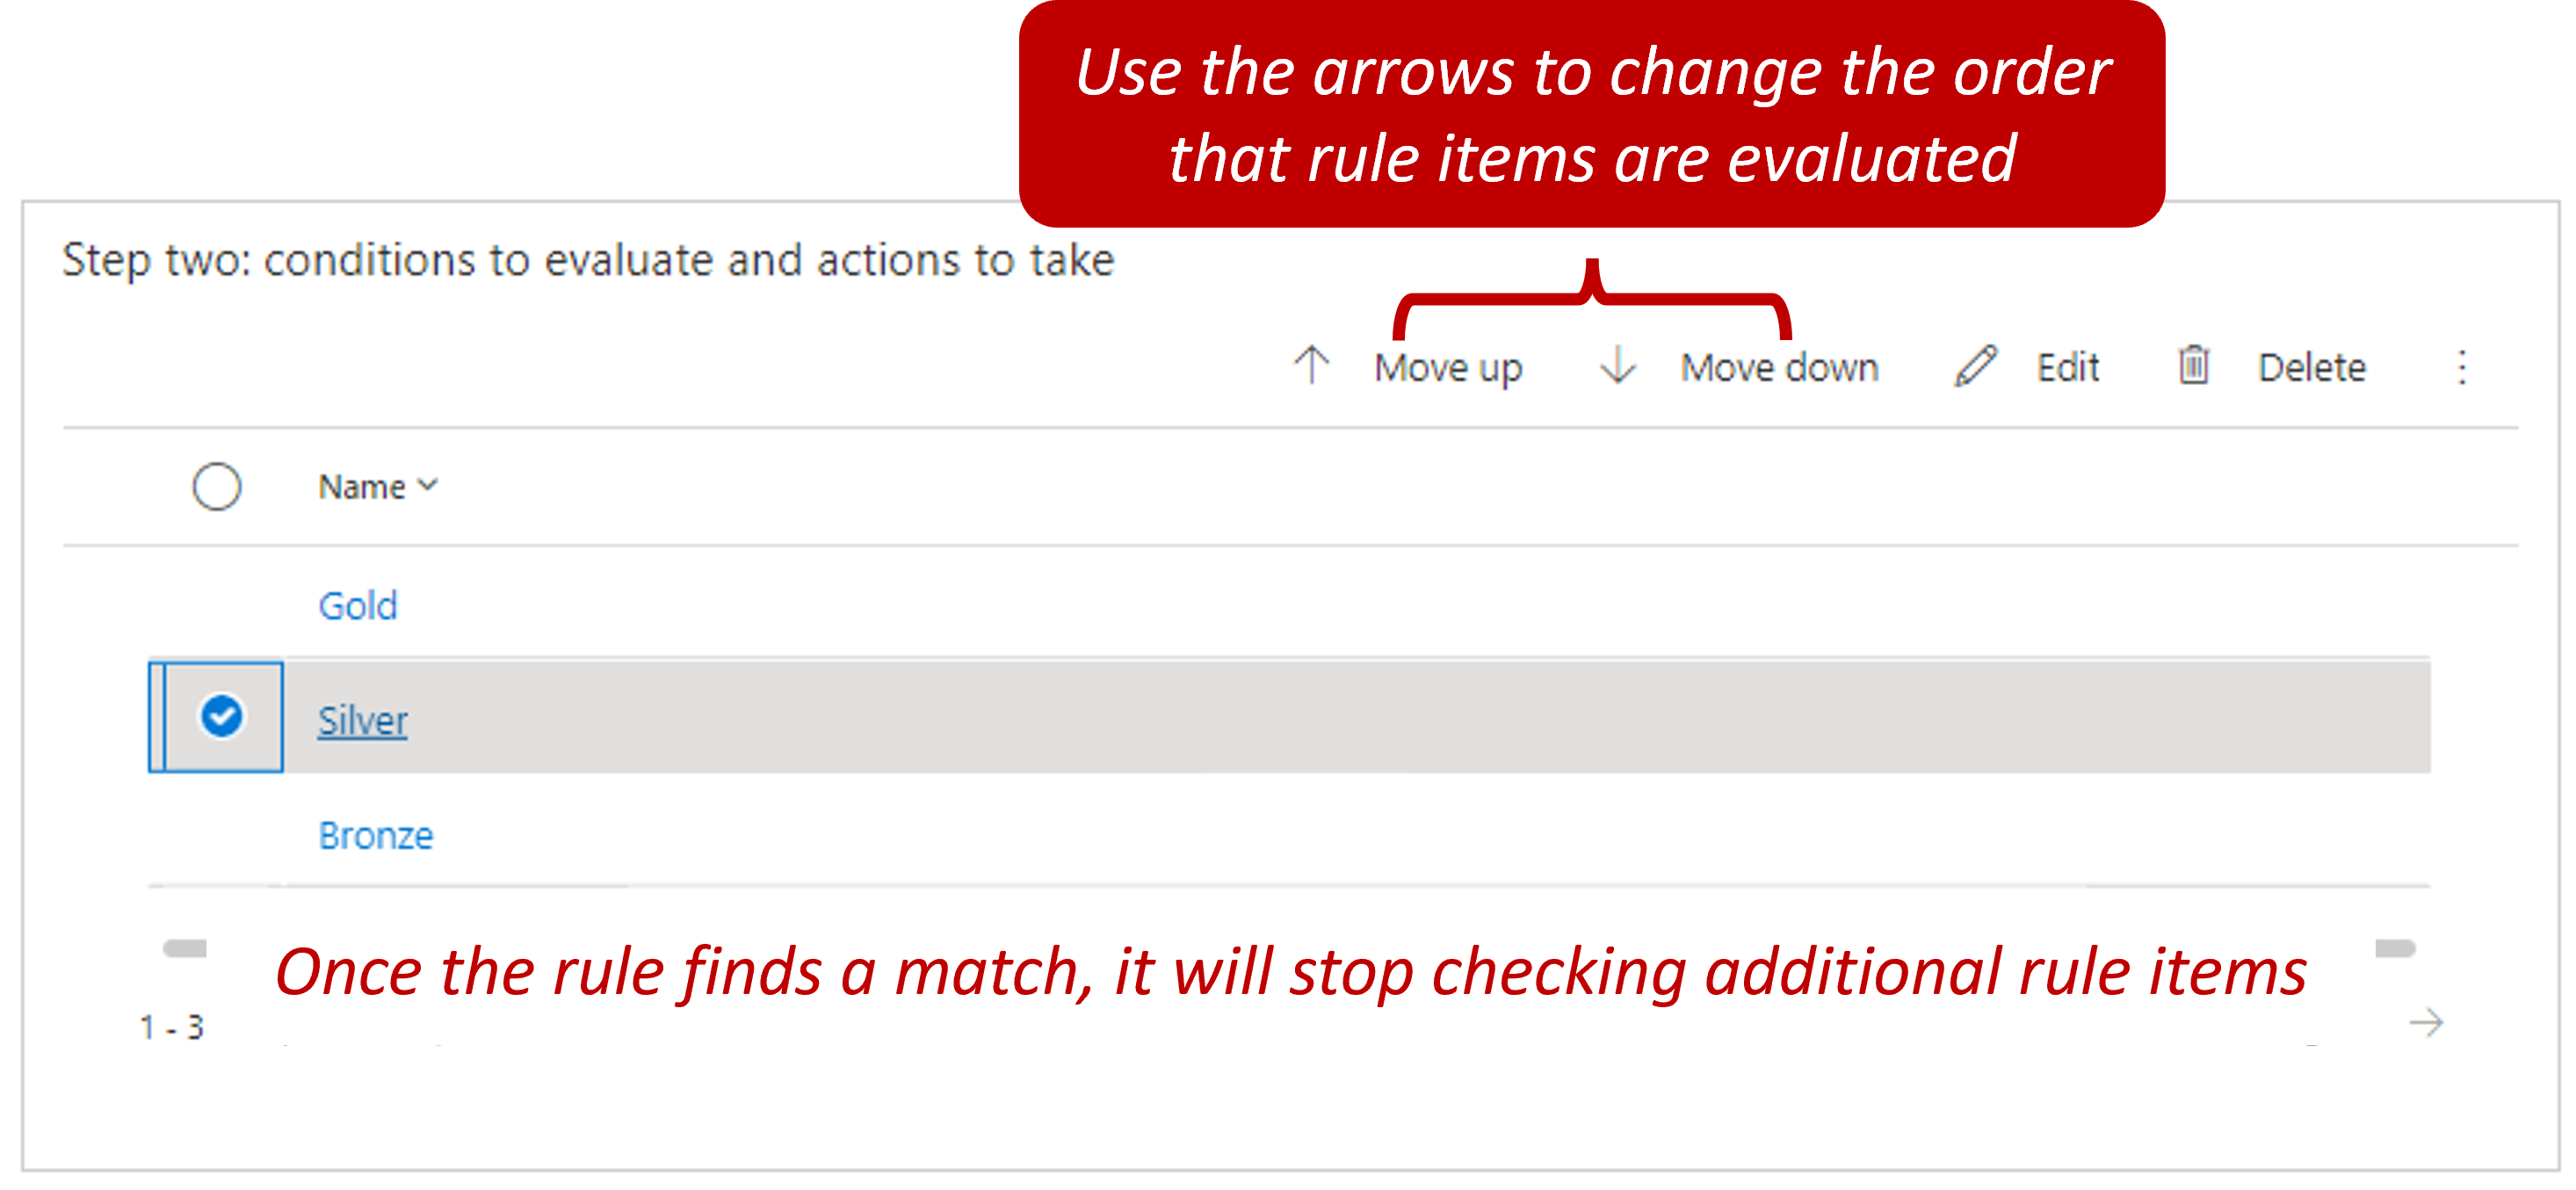 Screenshot of the rule items with Move up and Move down options for rules.